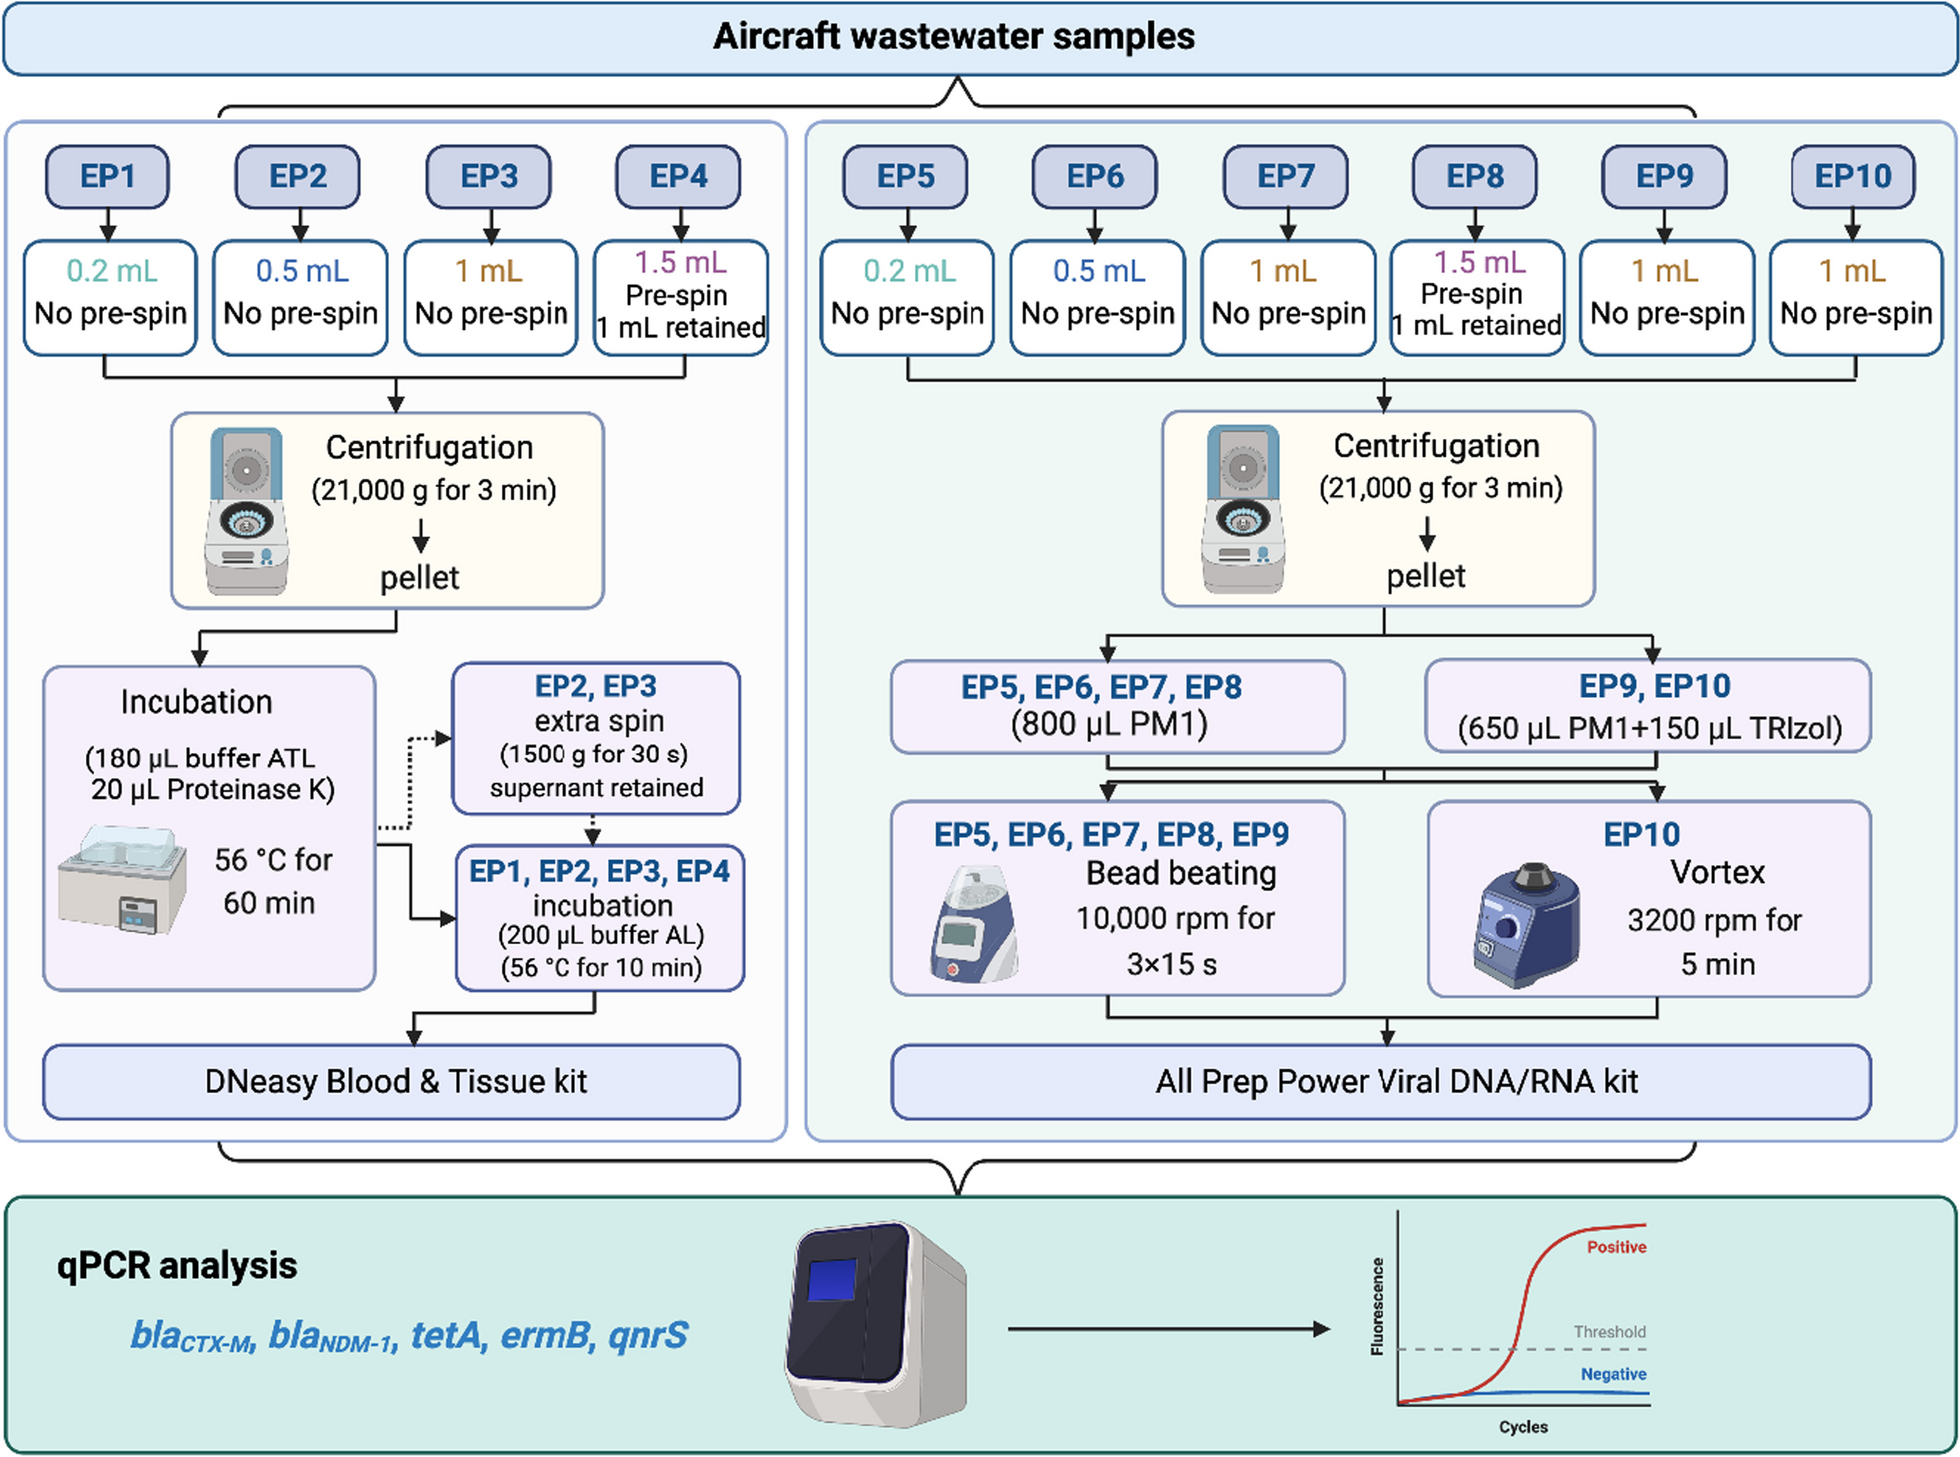 Assessment of nucleic acid extraction protocols for antibiotic resistance genes (ARGs) quantification in aircraft wastewater